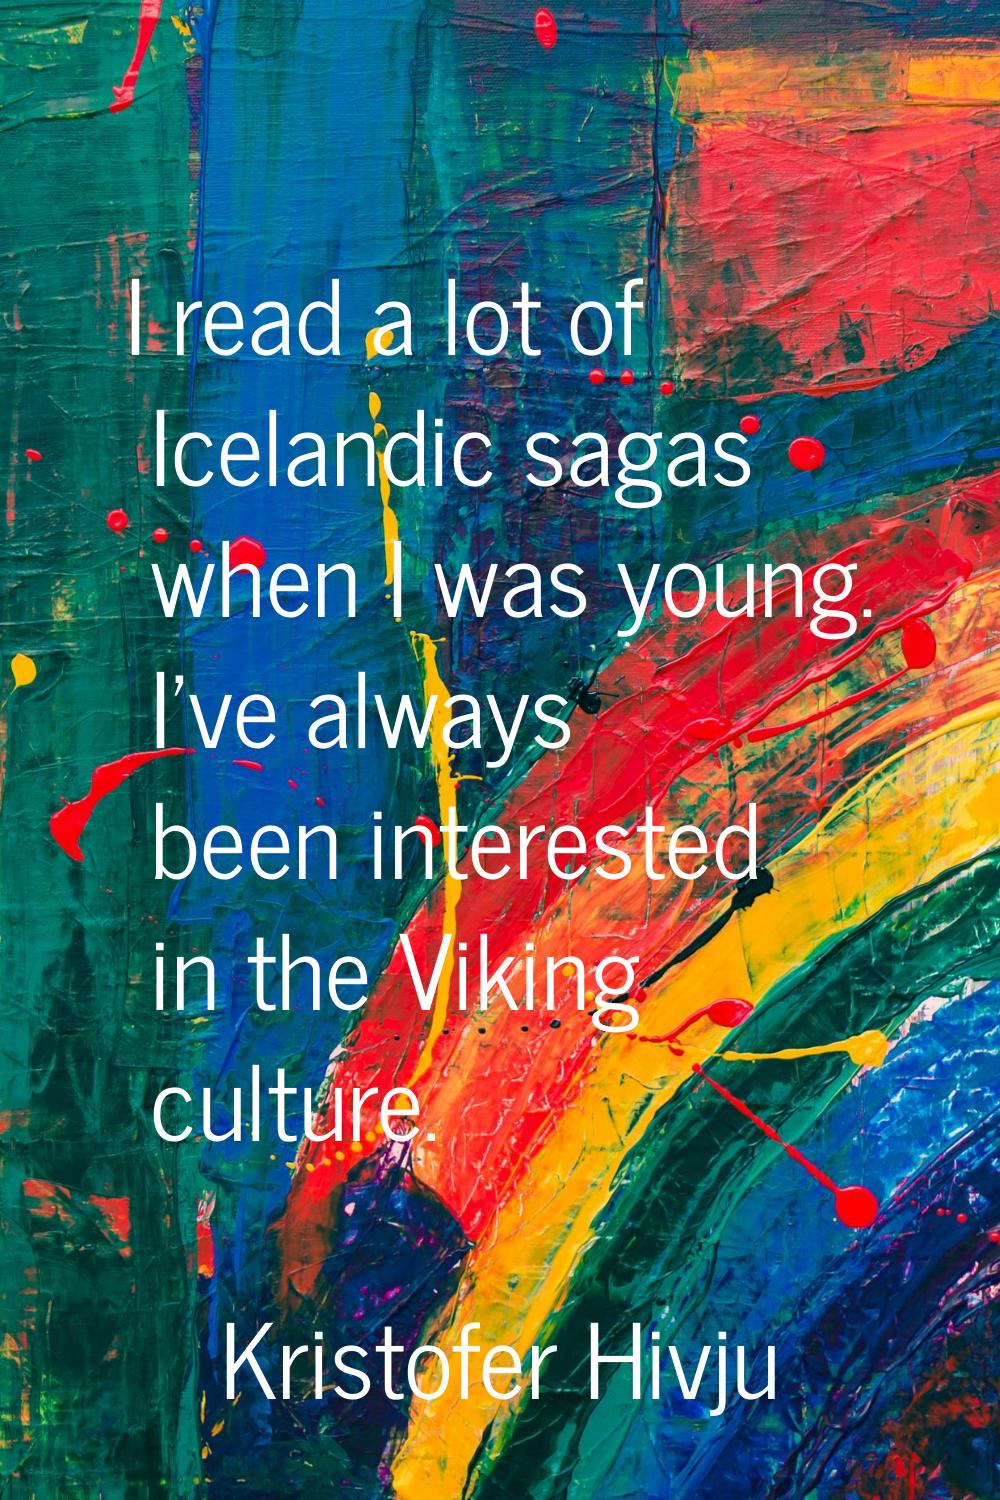 I read a lot of Icelandic sagas when I was young. I've always been interested in the Viking culture